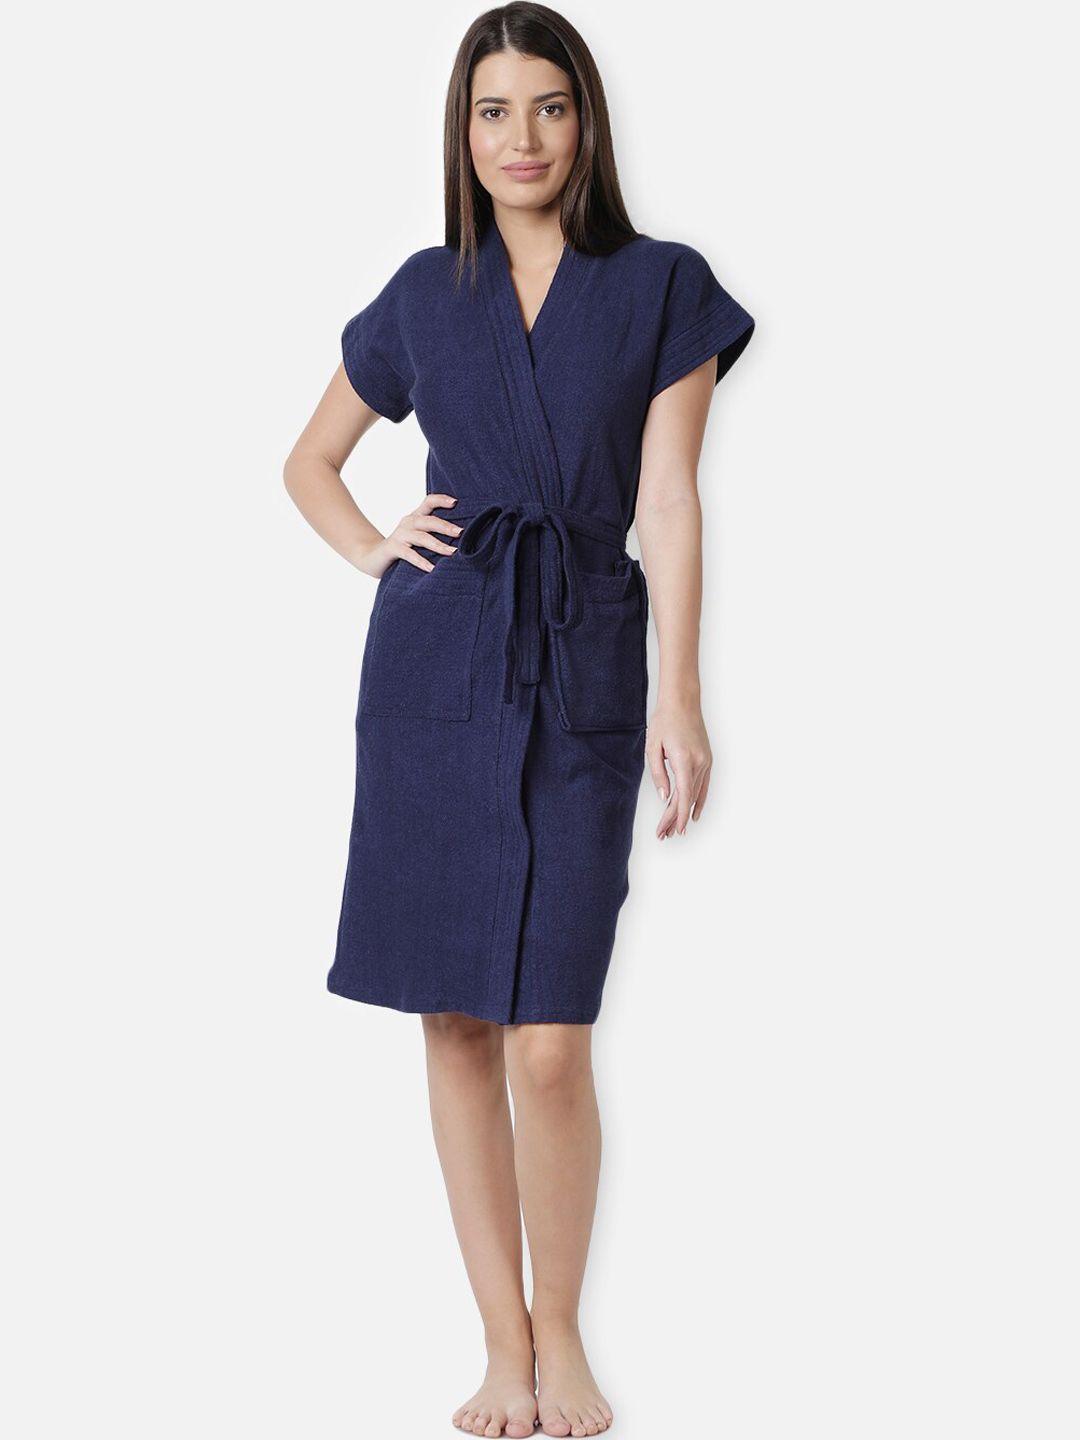 lacylook bath robe with belt